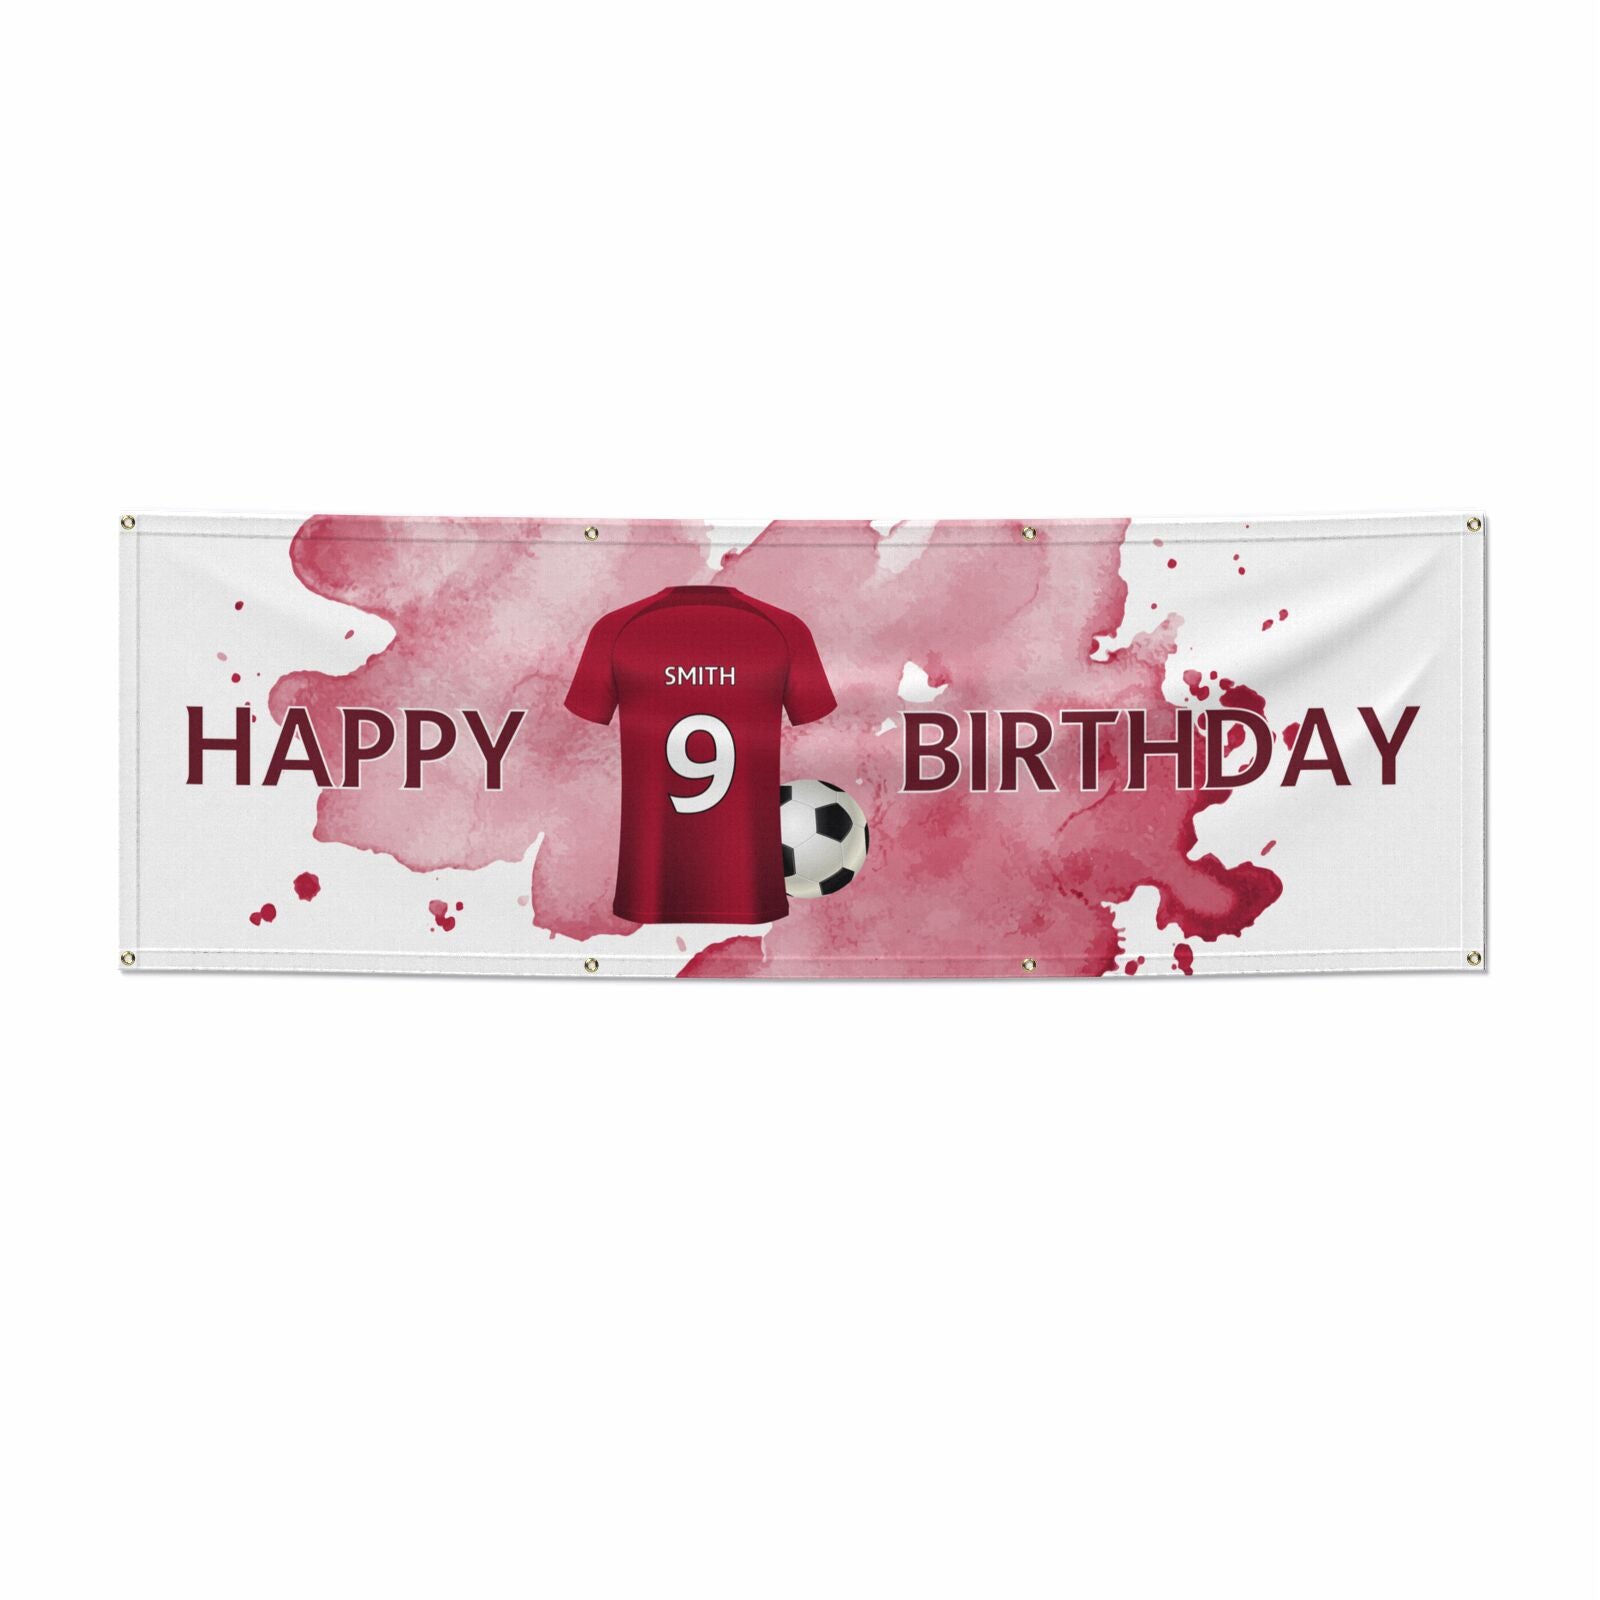 Red Personalised Football Shirt 6x2 Vinly Banner with Grommets